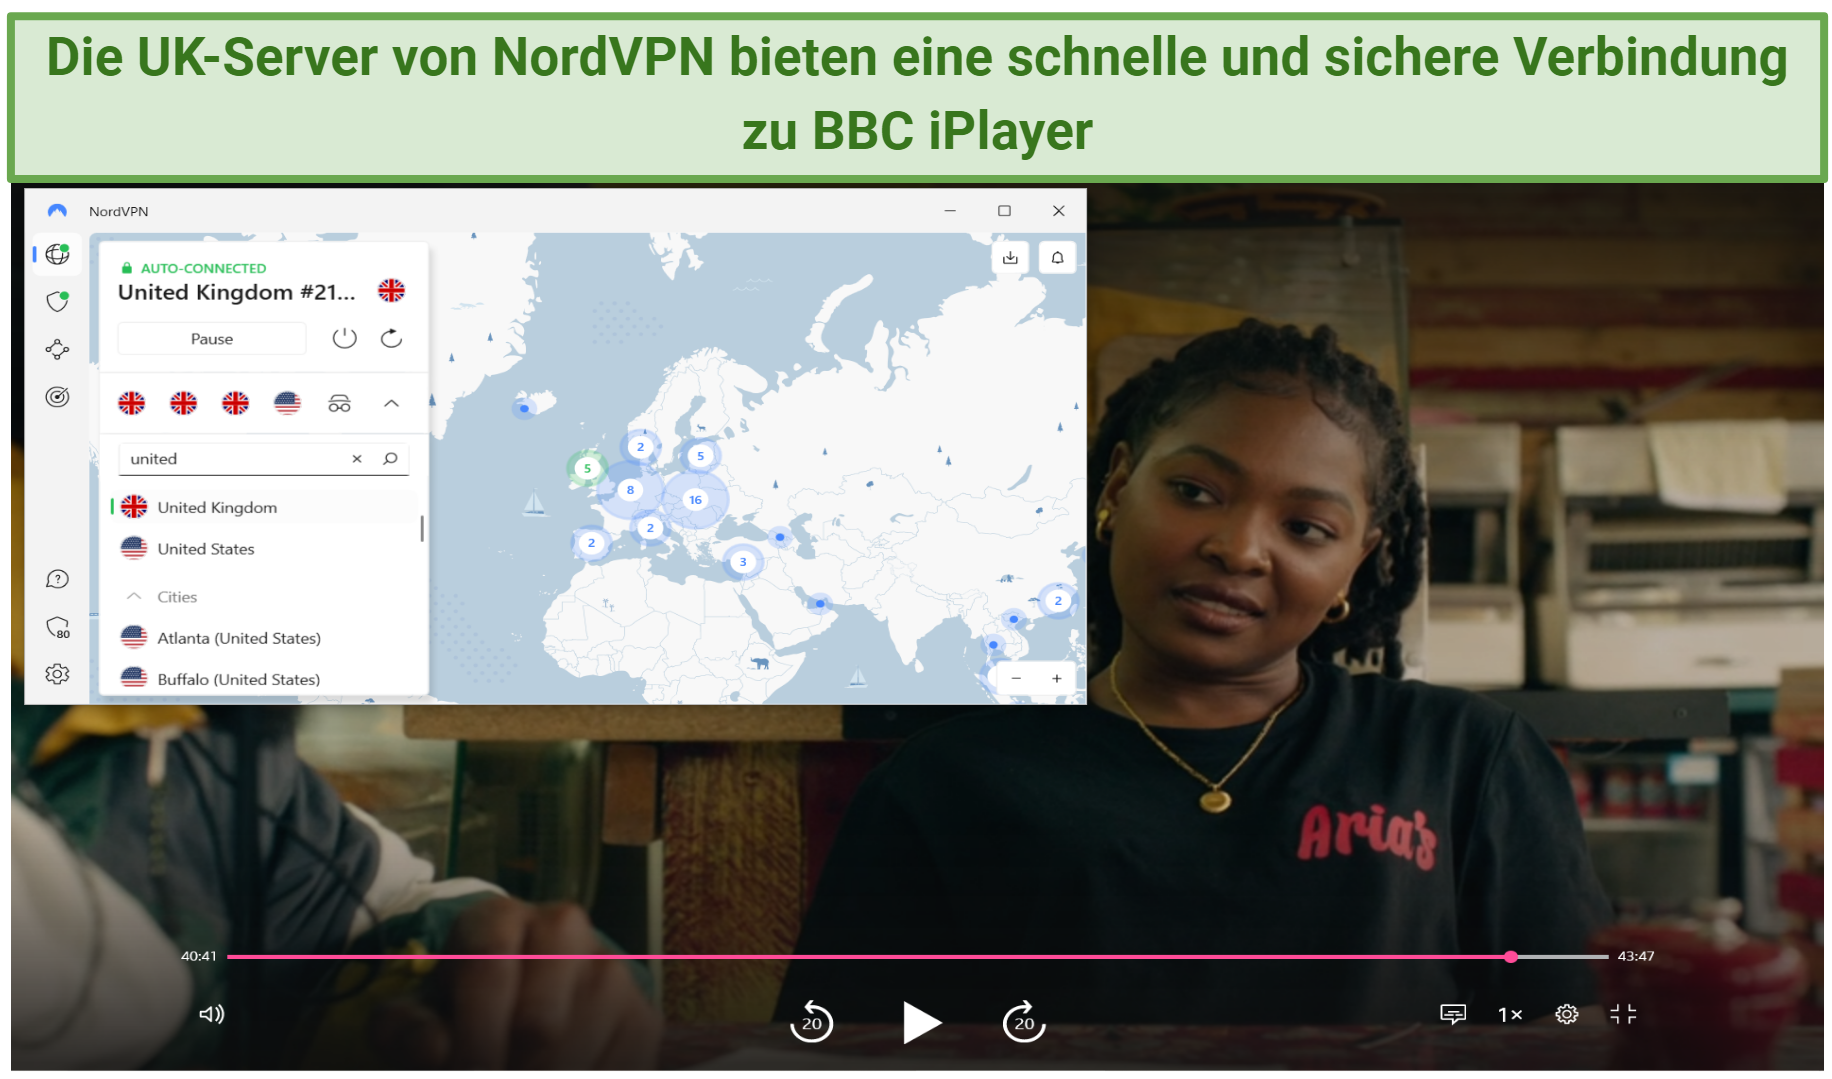 A screenshot showing Champion playing on BBC iPlayer while connected to one of NordVPN's UK servers